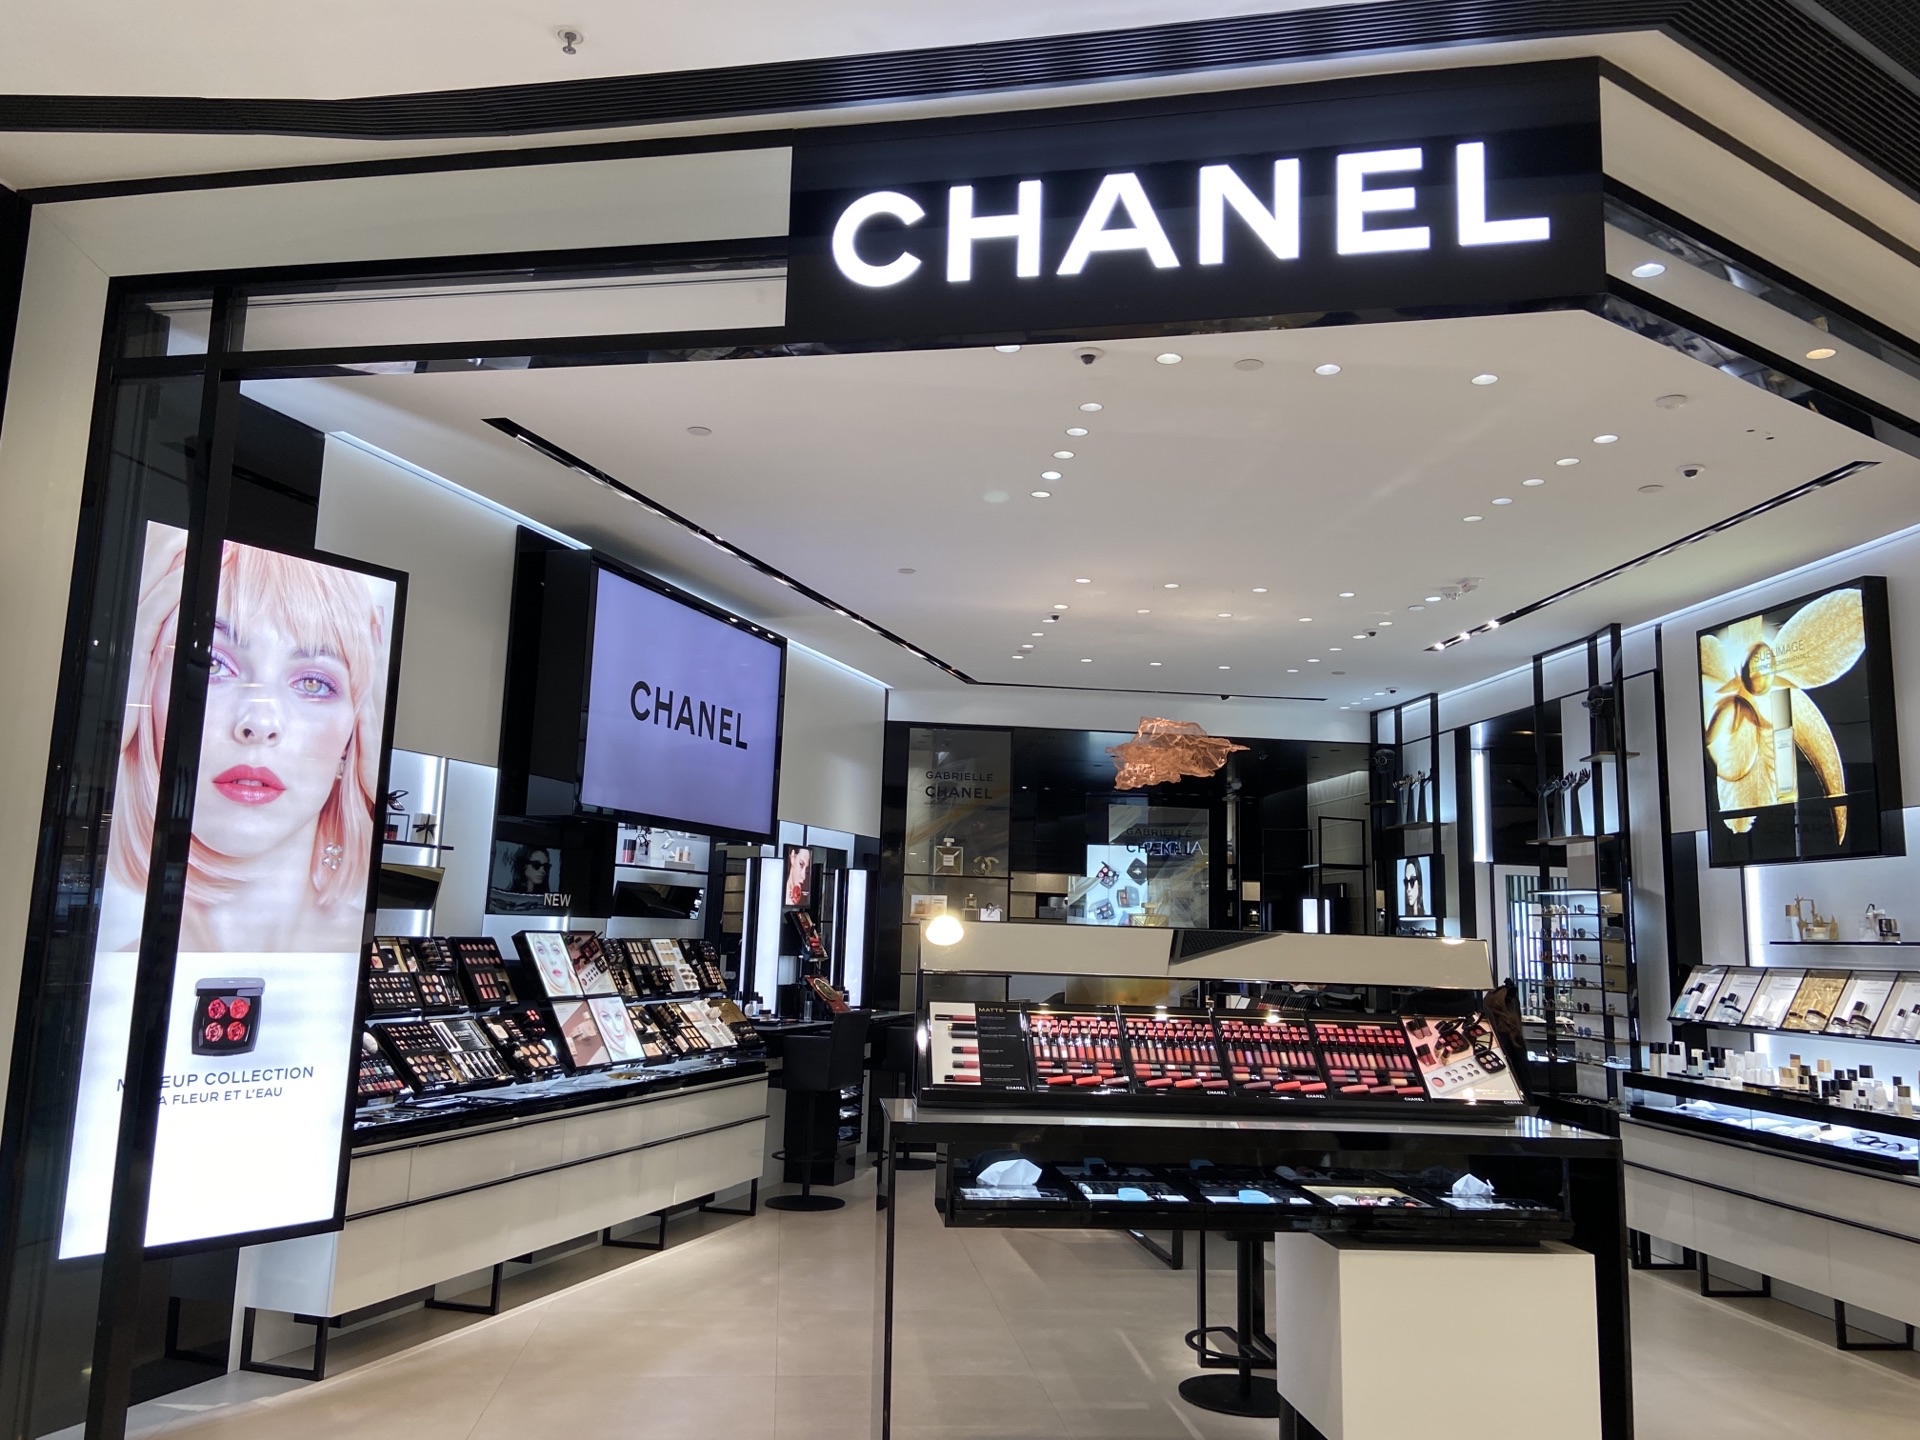 Chanel Store  Skin Care and Makeup Products  Shopkhoj